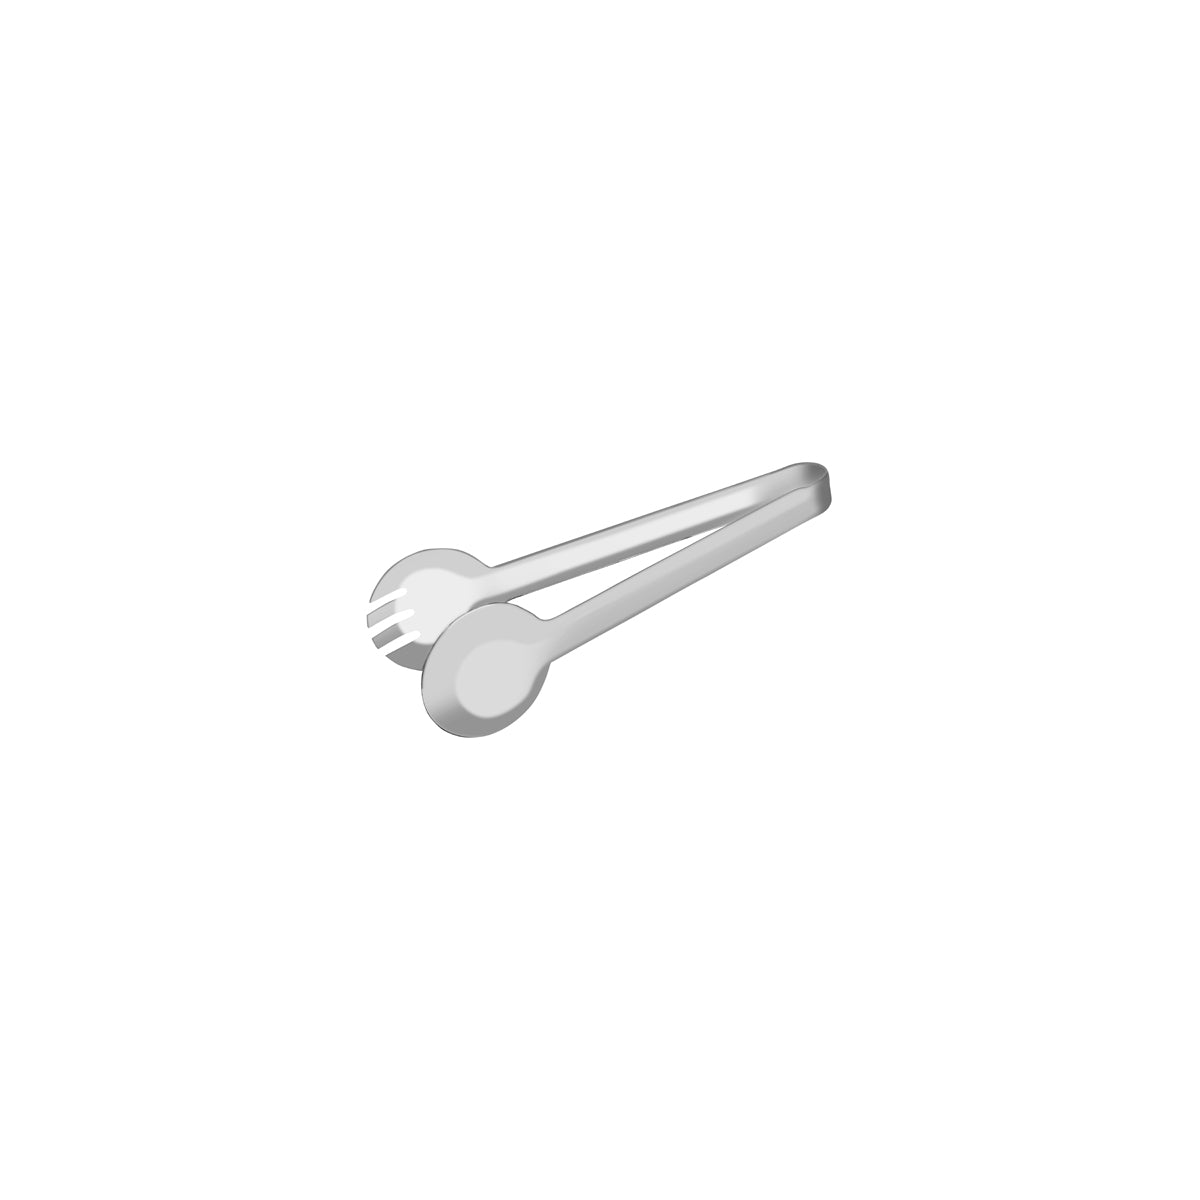 03080 Chef Inox Salad Tong Stainless Steel 240mm Tomkin Australia Hospitality Supplies